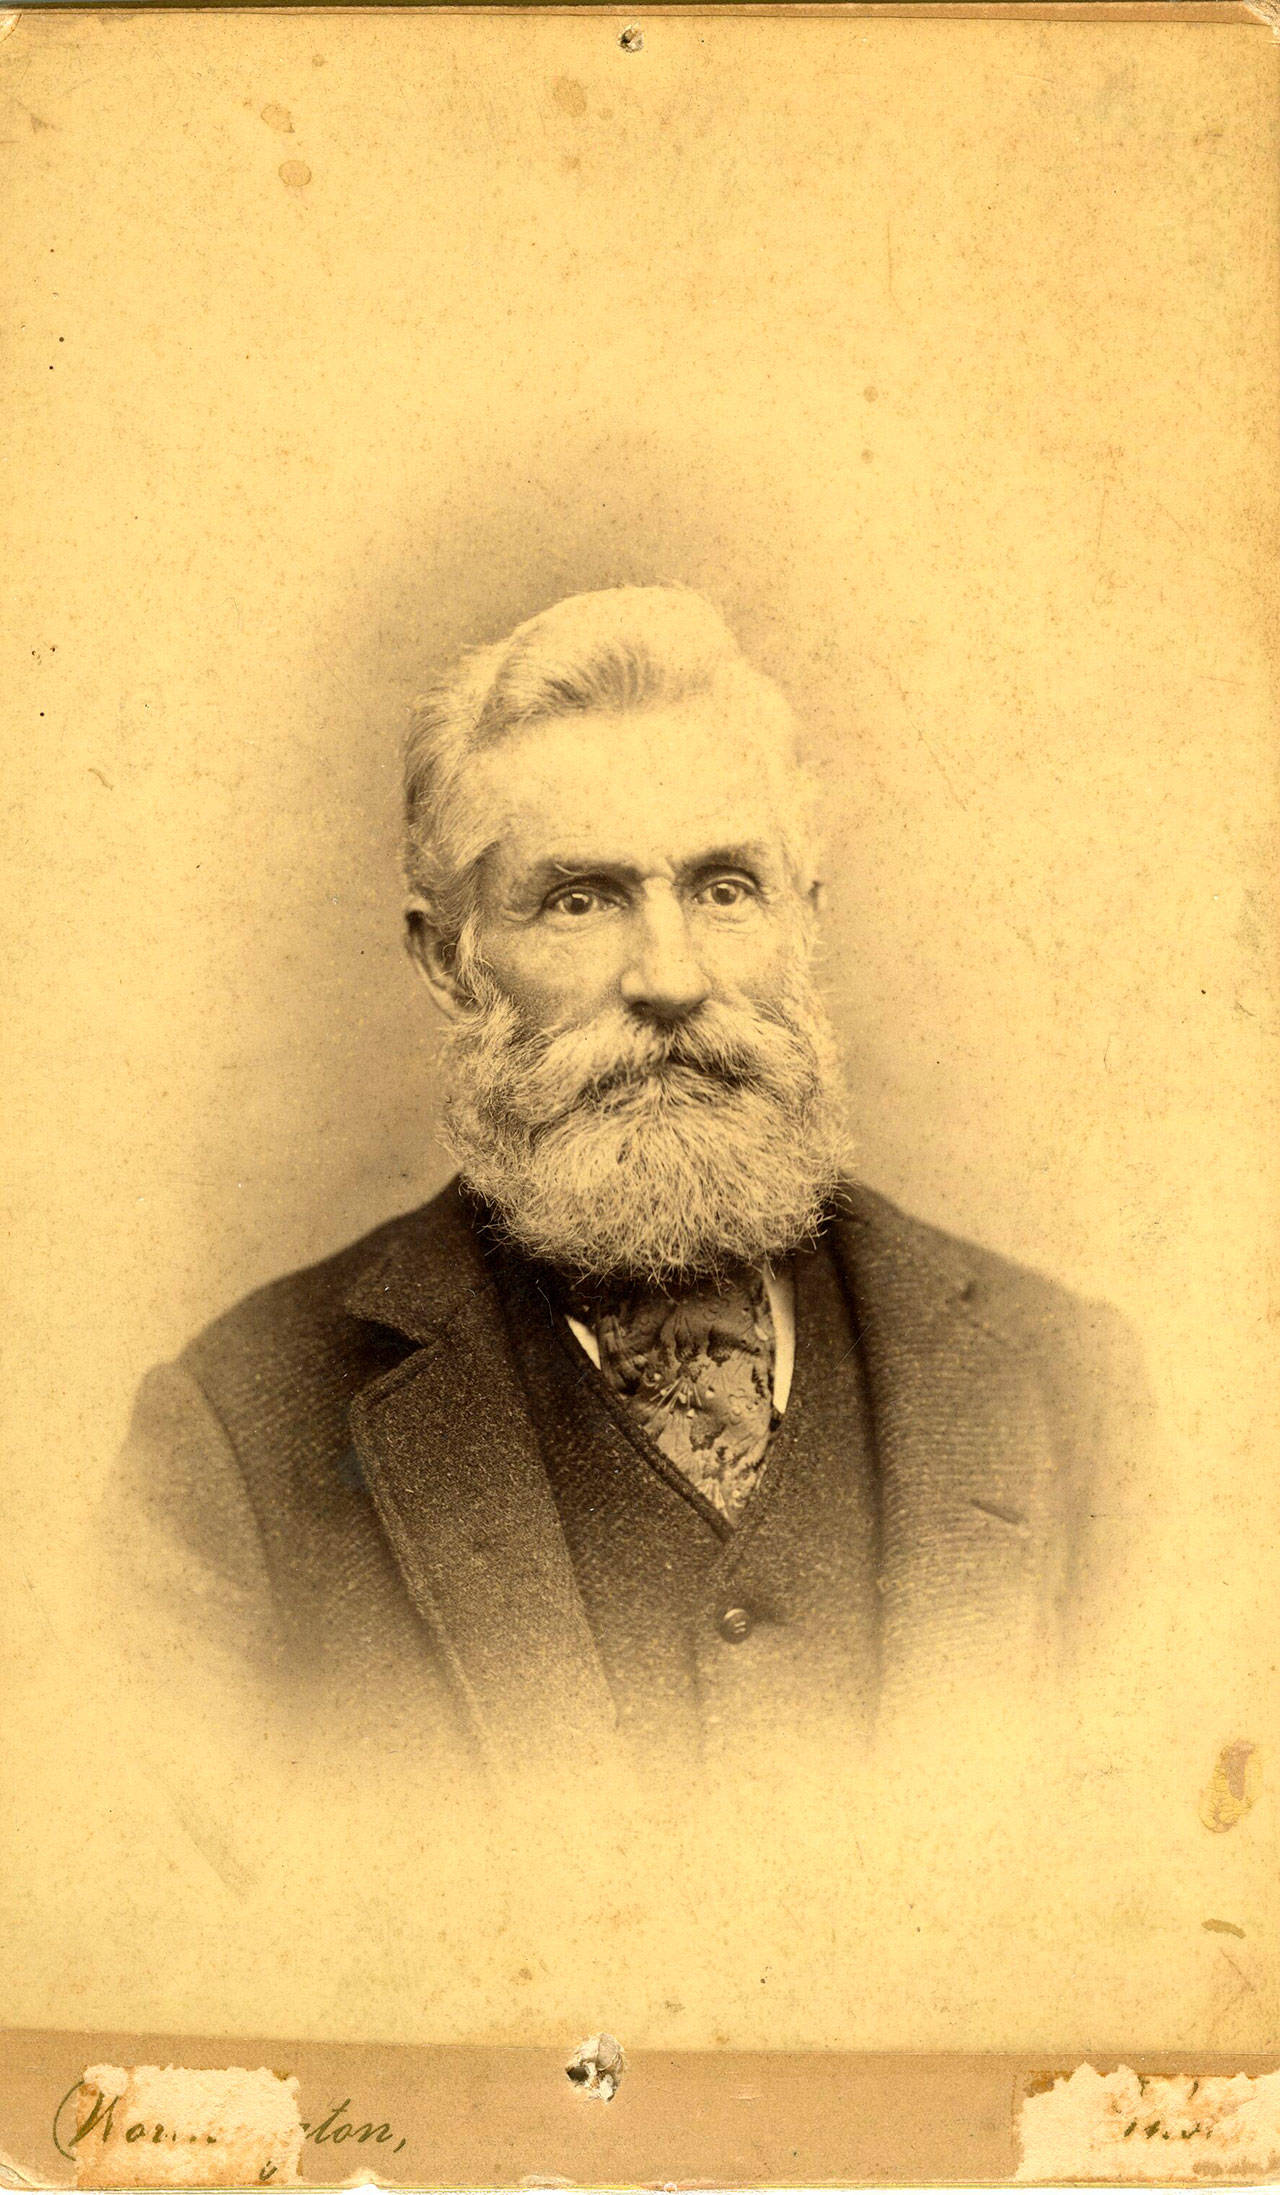 A portrait of Capt. Henry E. Morgan from about 1890. (Jefferson County Historical Society)